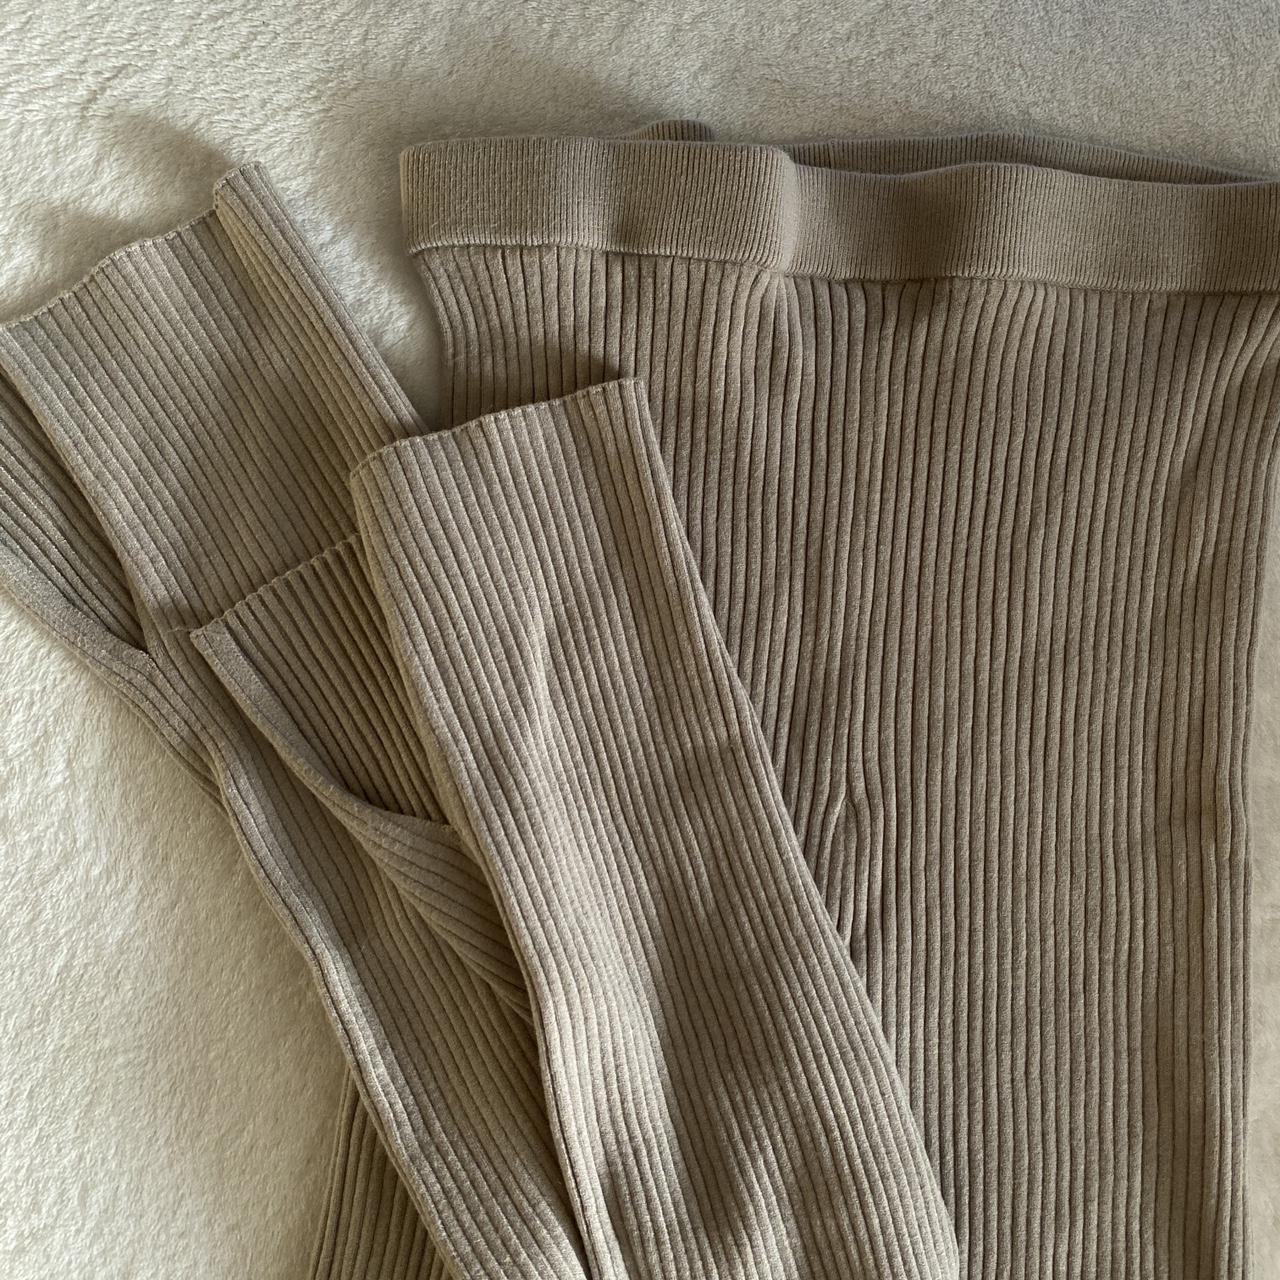 H&M flared ankle leggings/tights size small but also - Depop